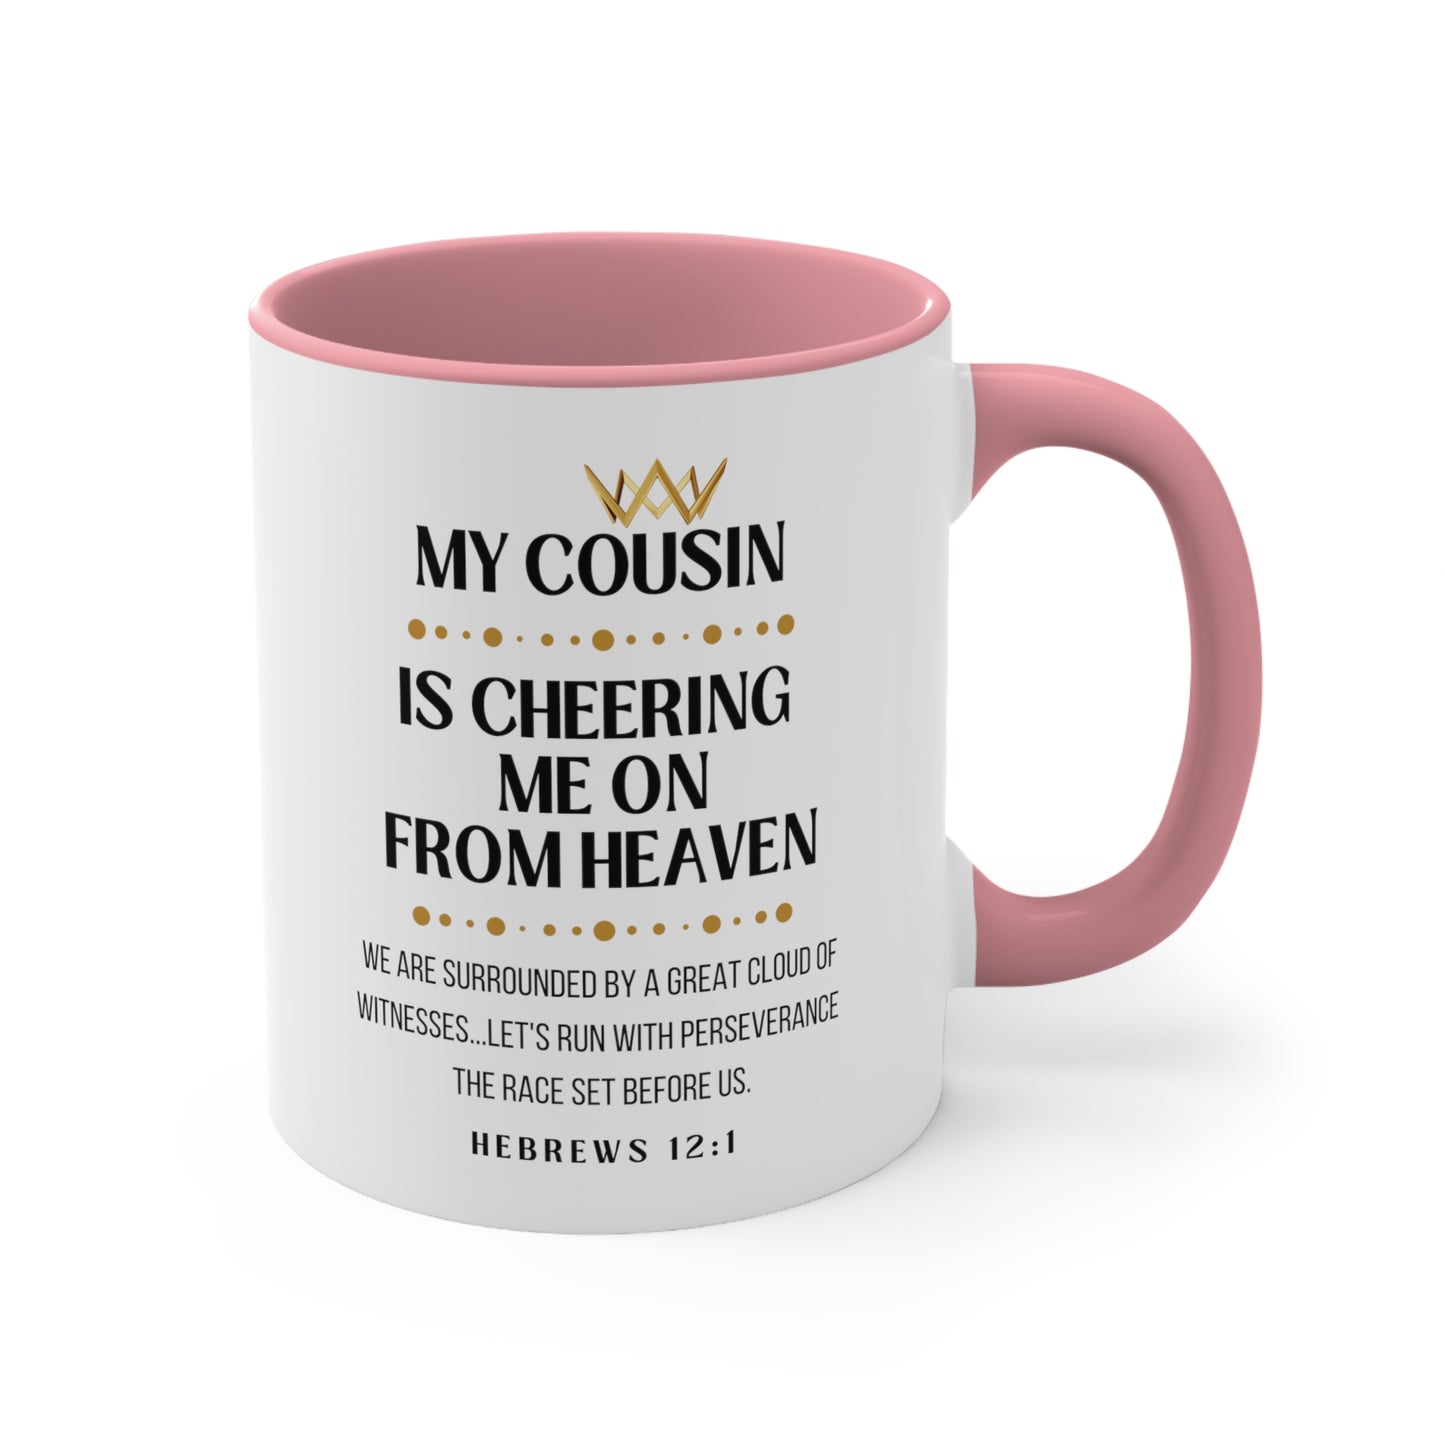 Cousin Memorial Gift Mug, Cheering Me on from Heaven